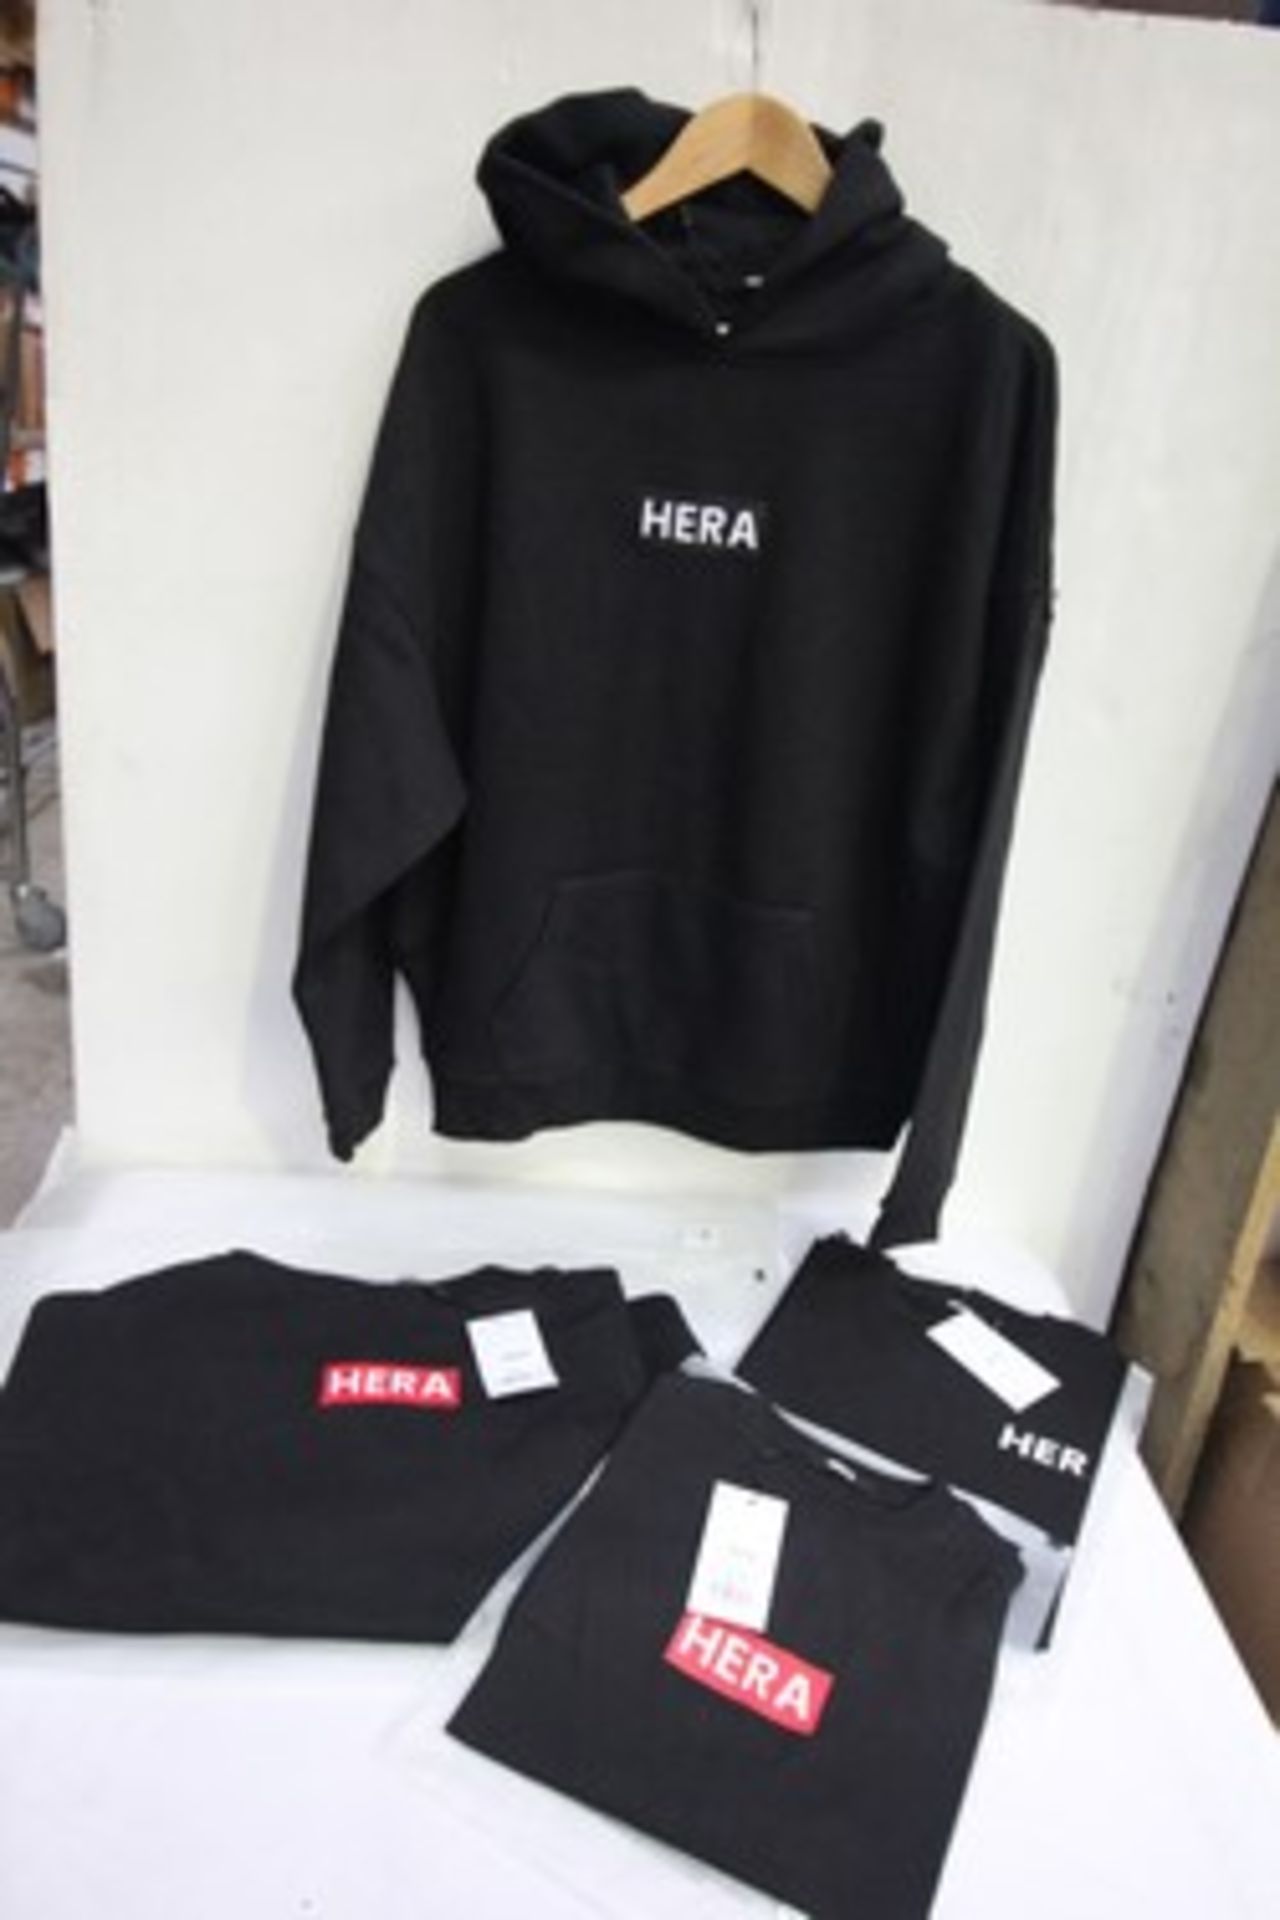 4 x items of Hera clothing comprising 2 x hoodies and 2 x t-shirts in various styles and sizes - New